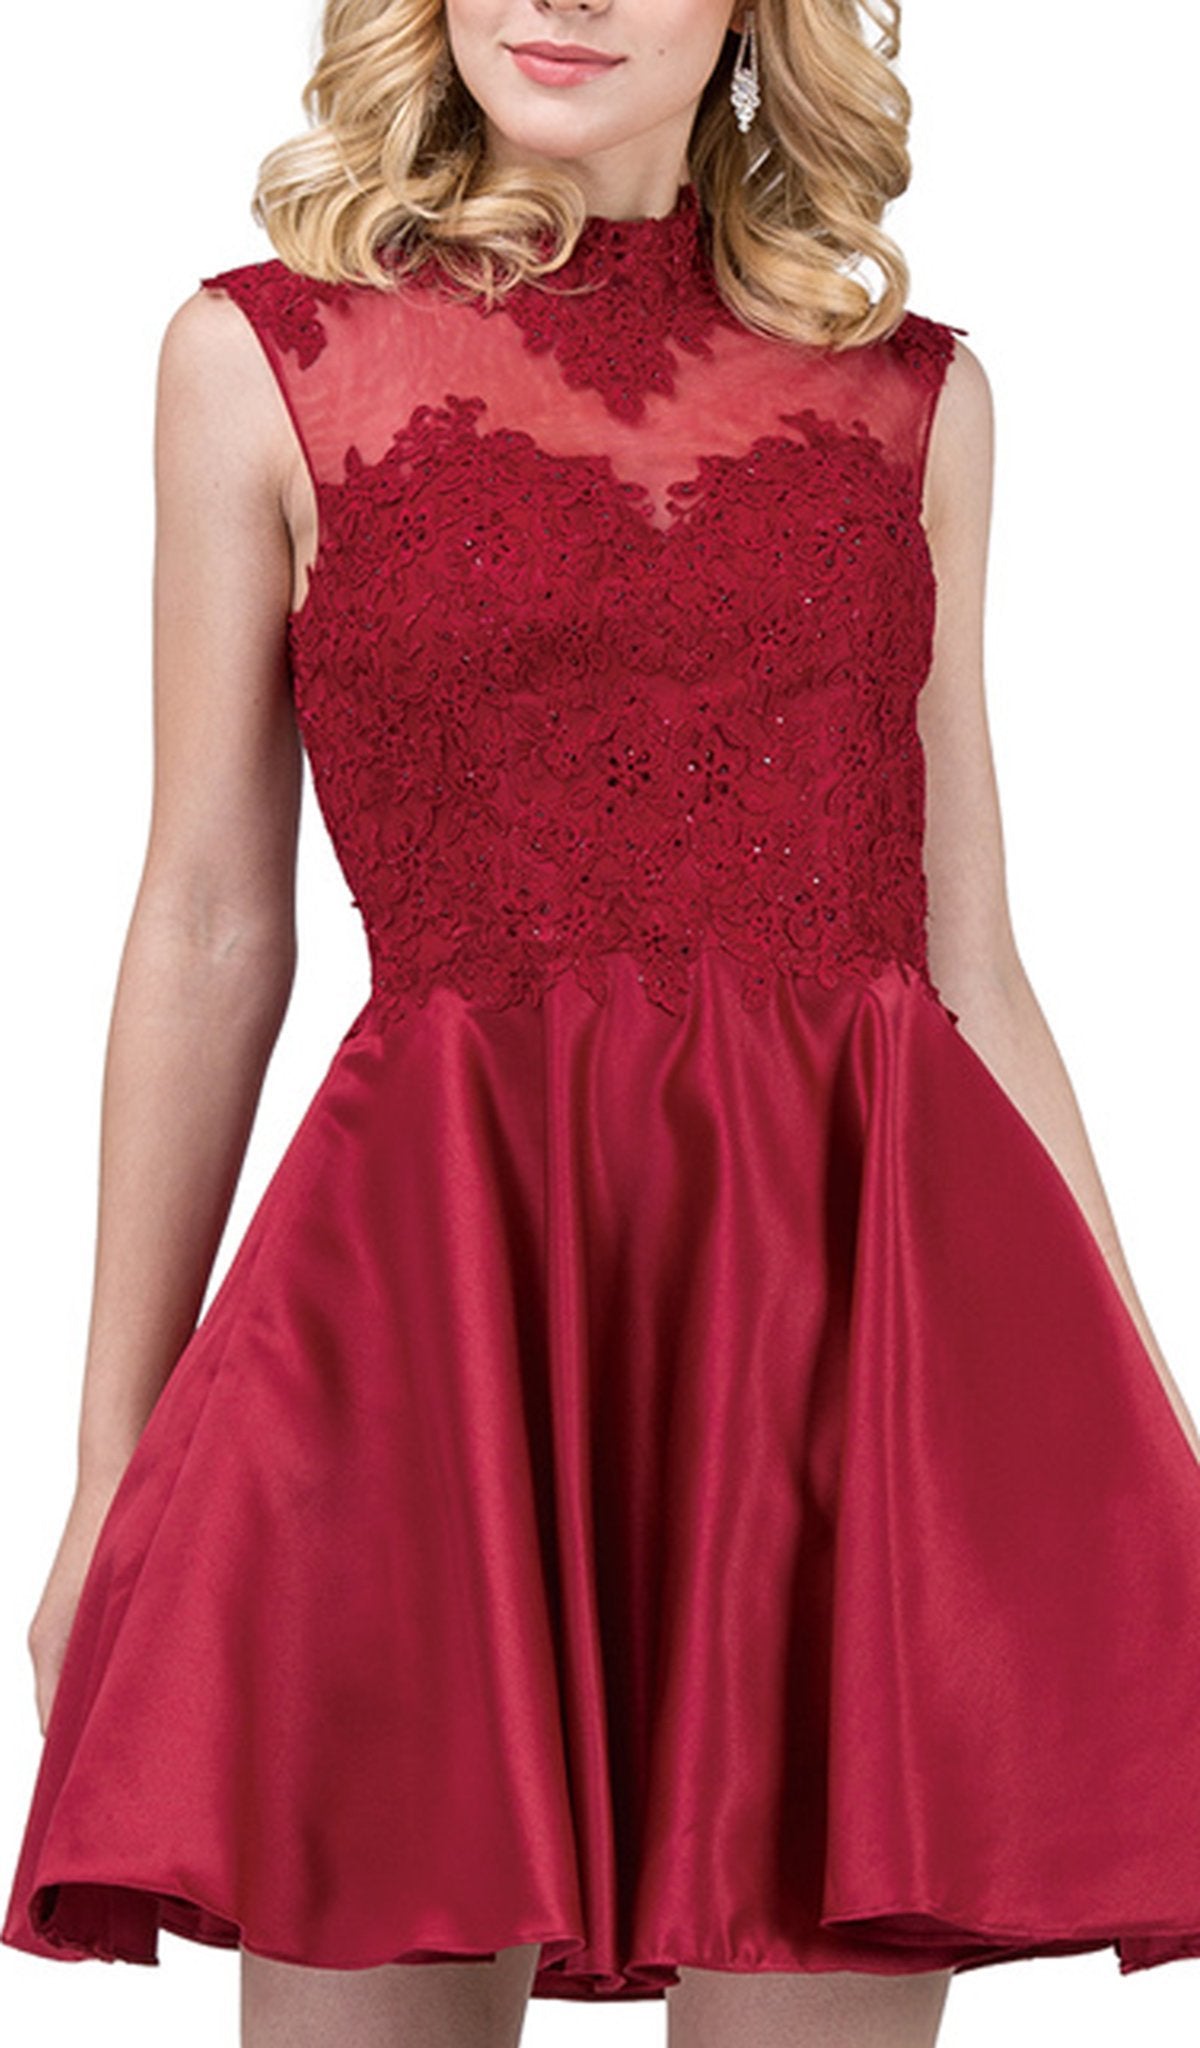 Dancing Queen - 3069 Appliqued Illusion High Neck Homecoming Dress in Red